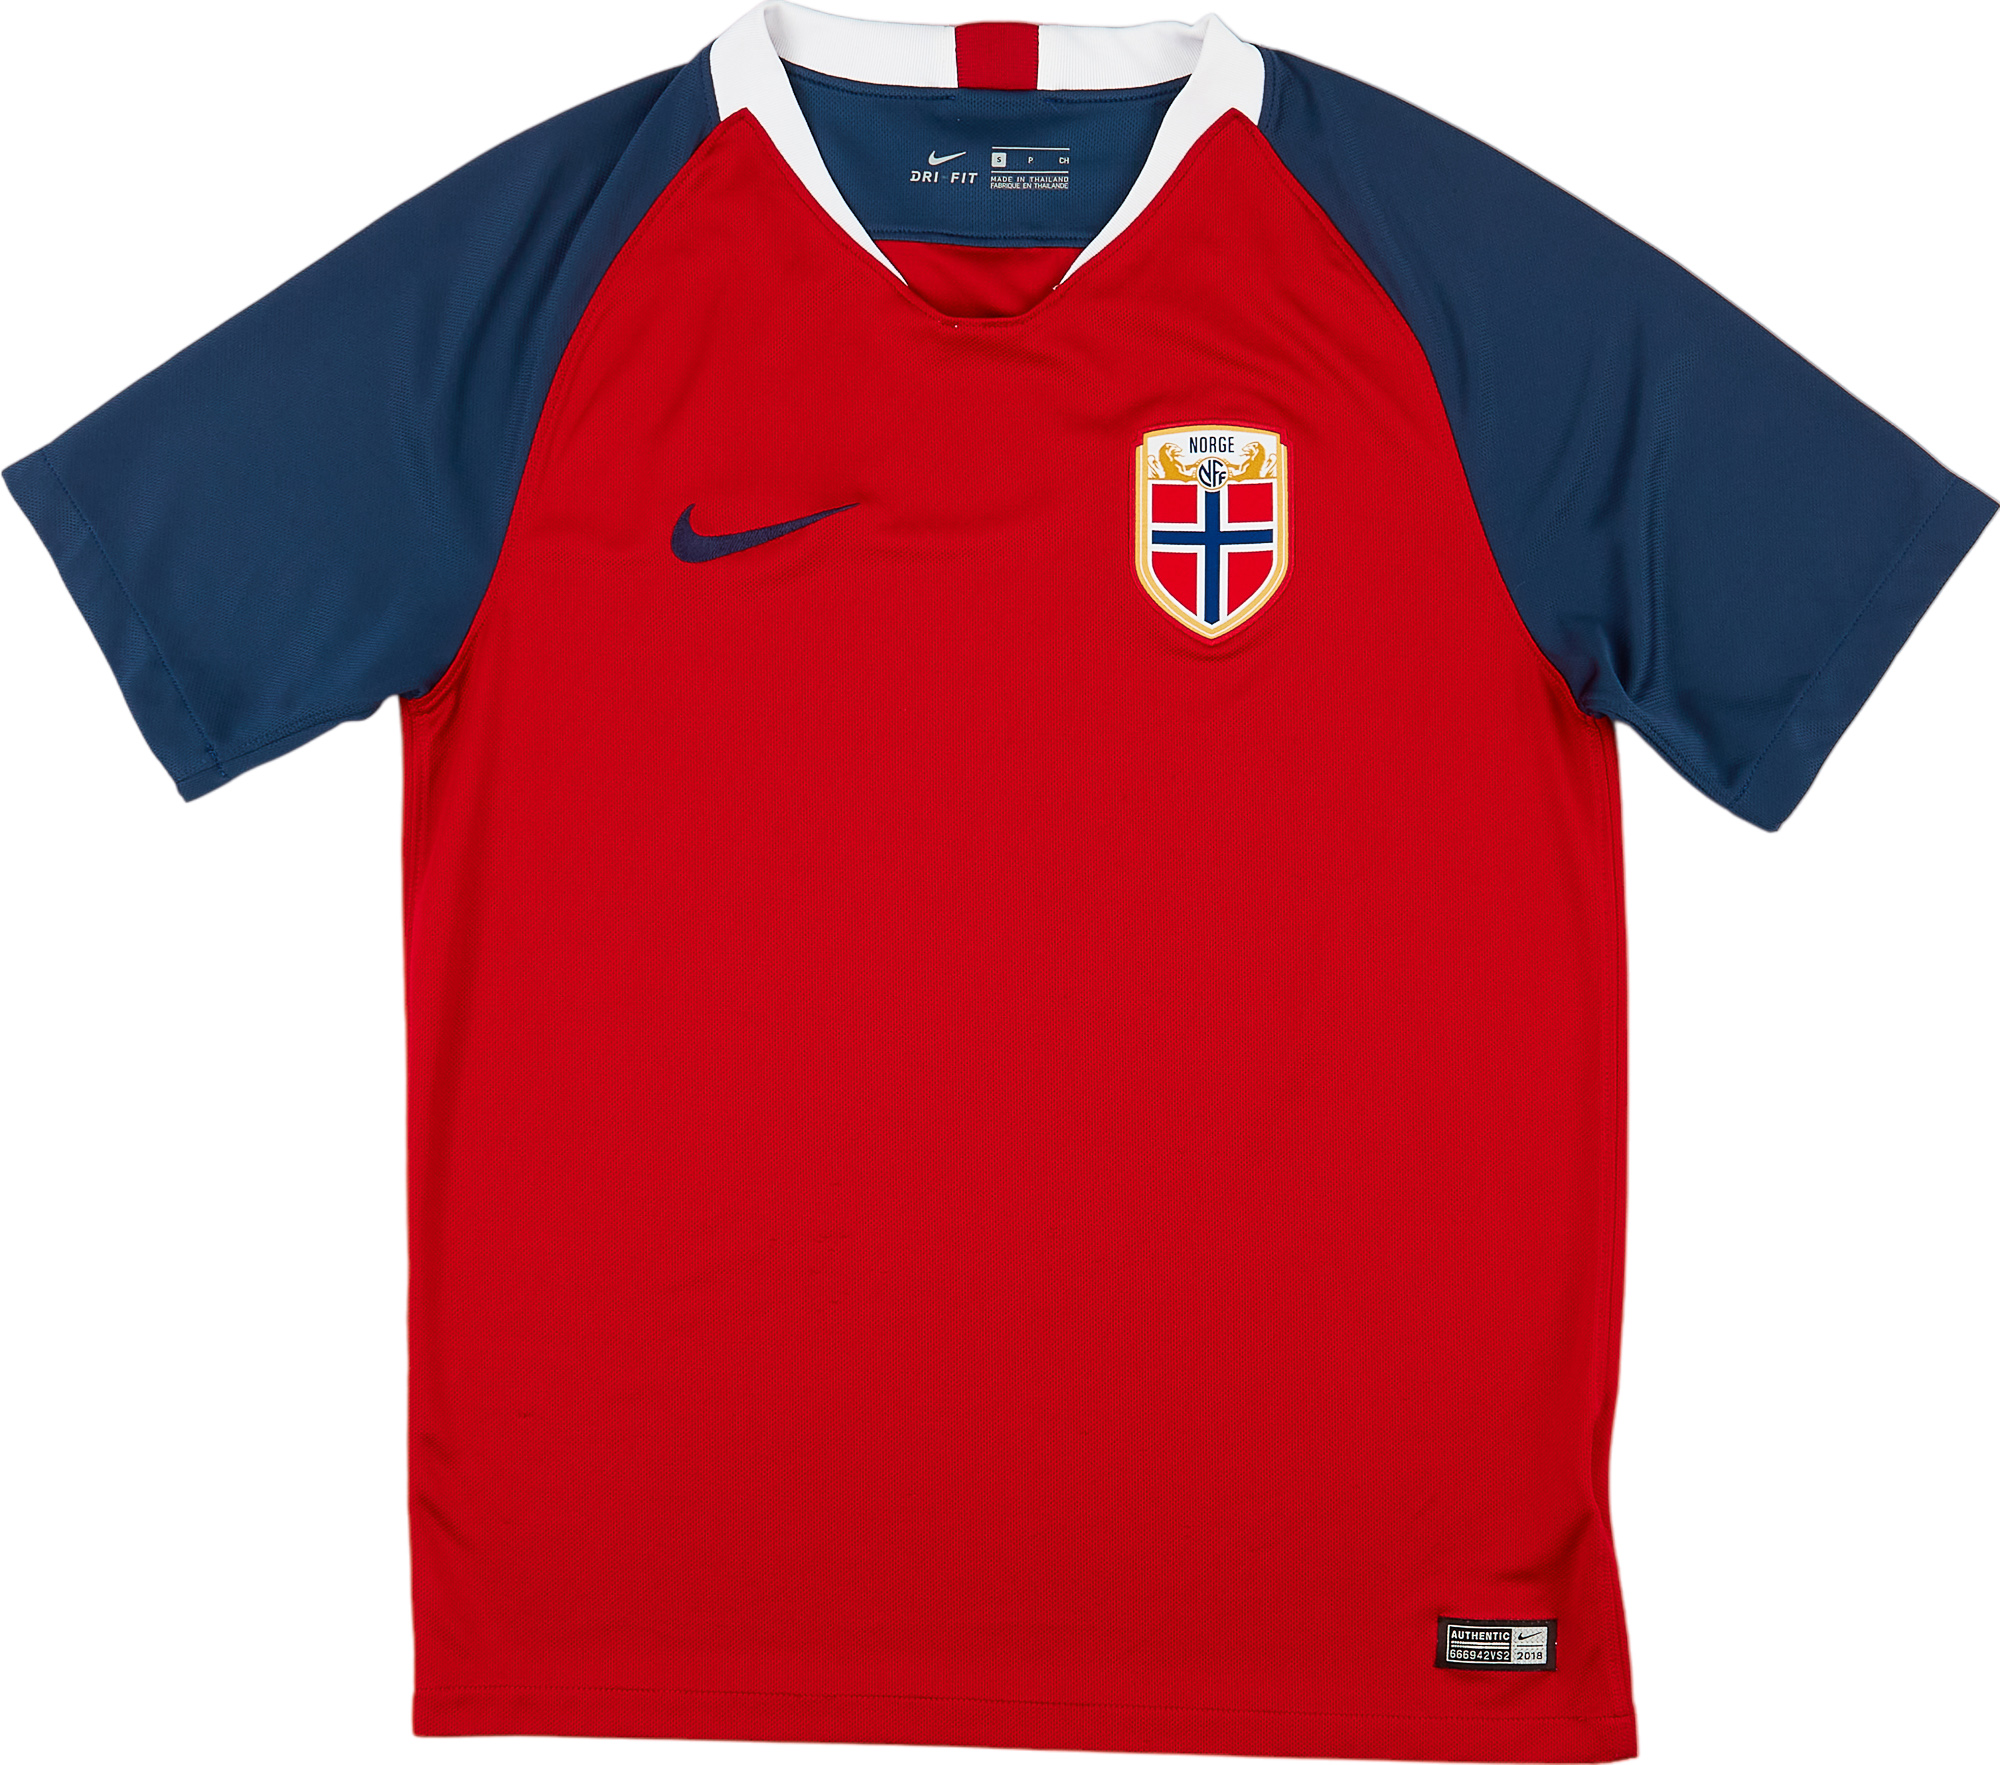 2018-19 Norway Home Shirt - Excellent 9/10 - (S)